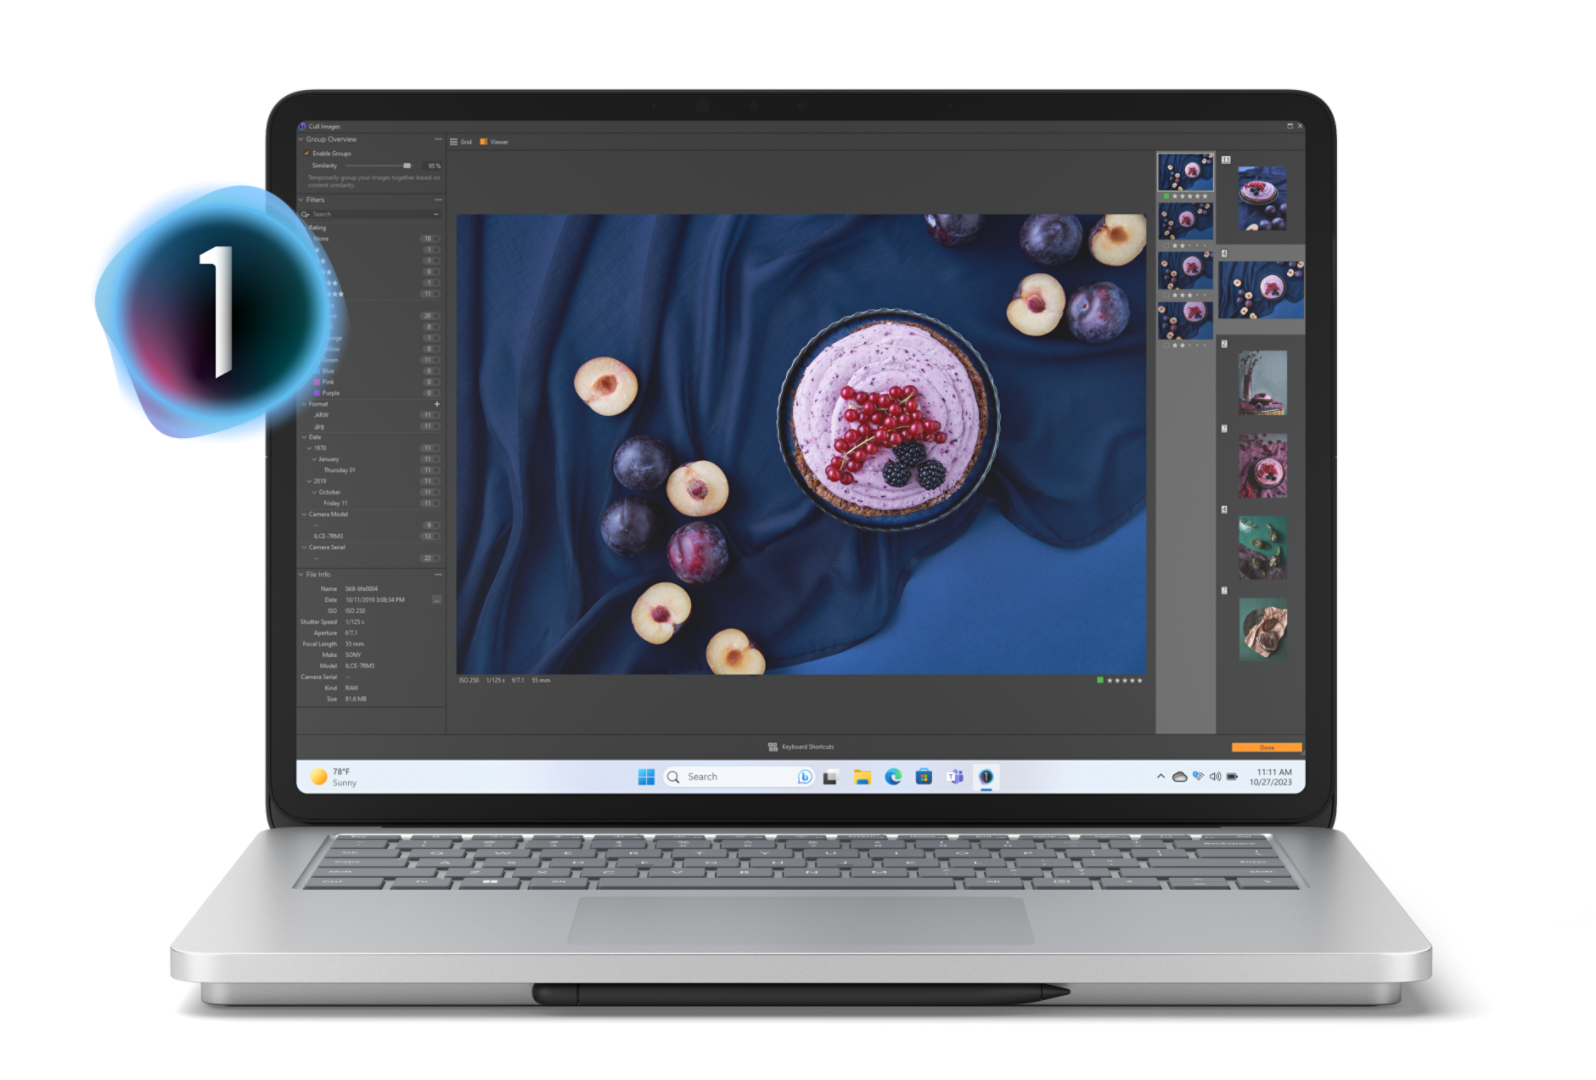 Surface Laptop Studio 2 showing a fruit pie flanked by ripened plums on a dark blue table cloth on the device screen with Capture One menu items popping out of the display.